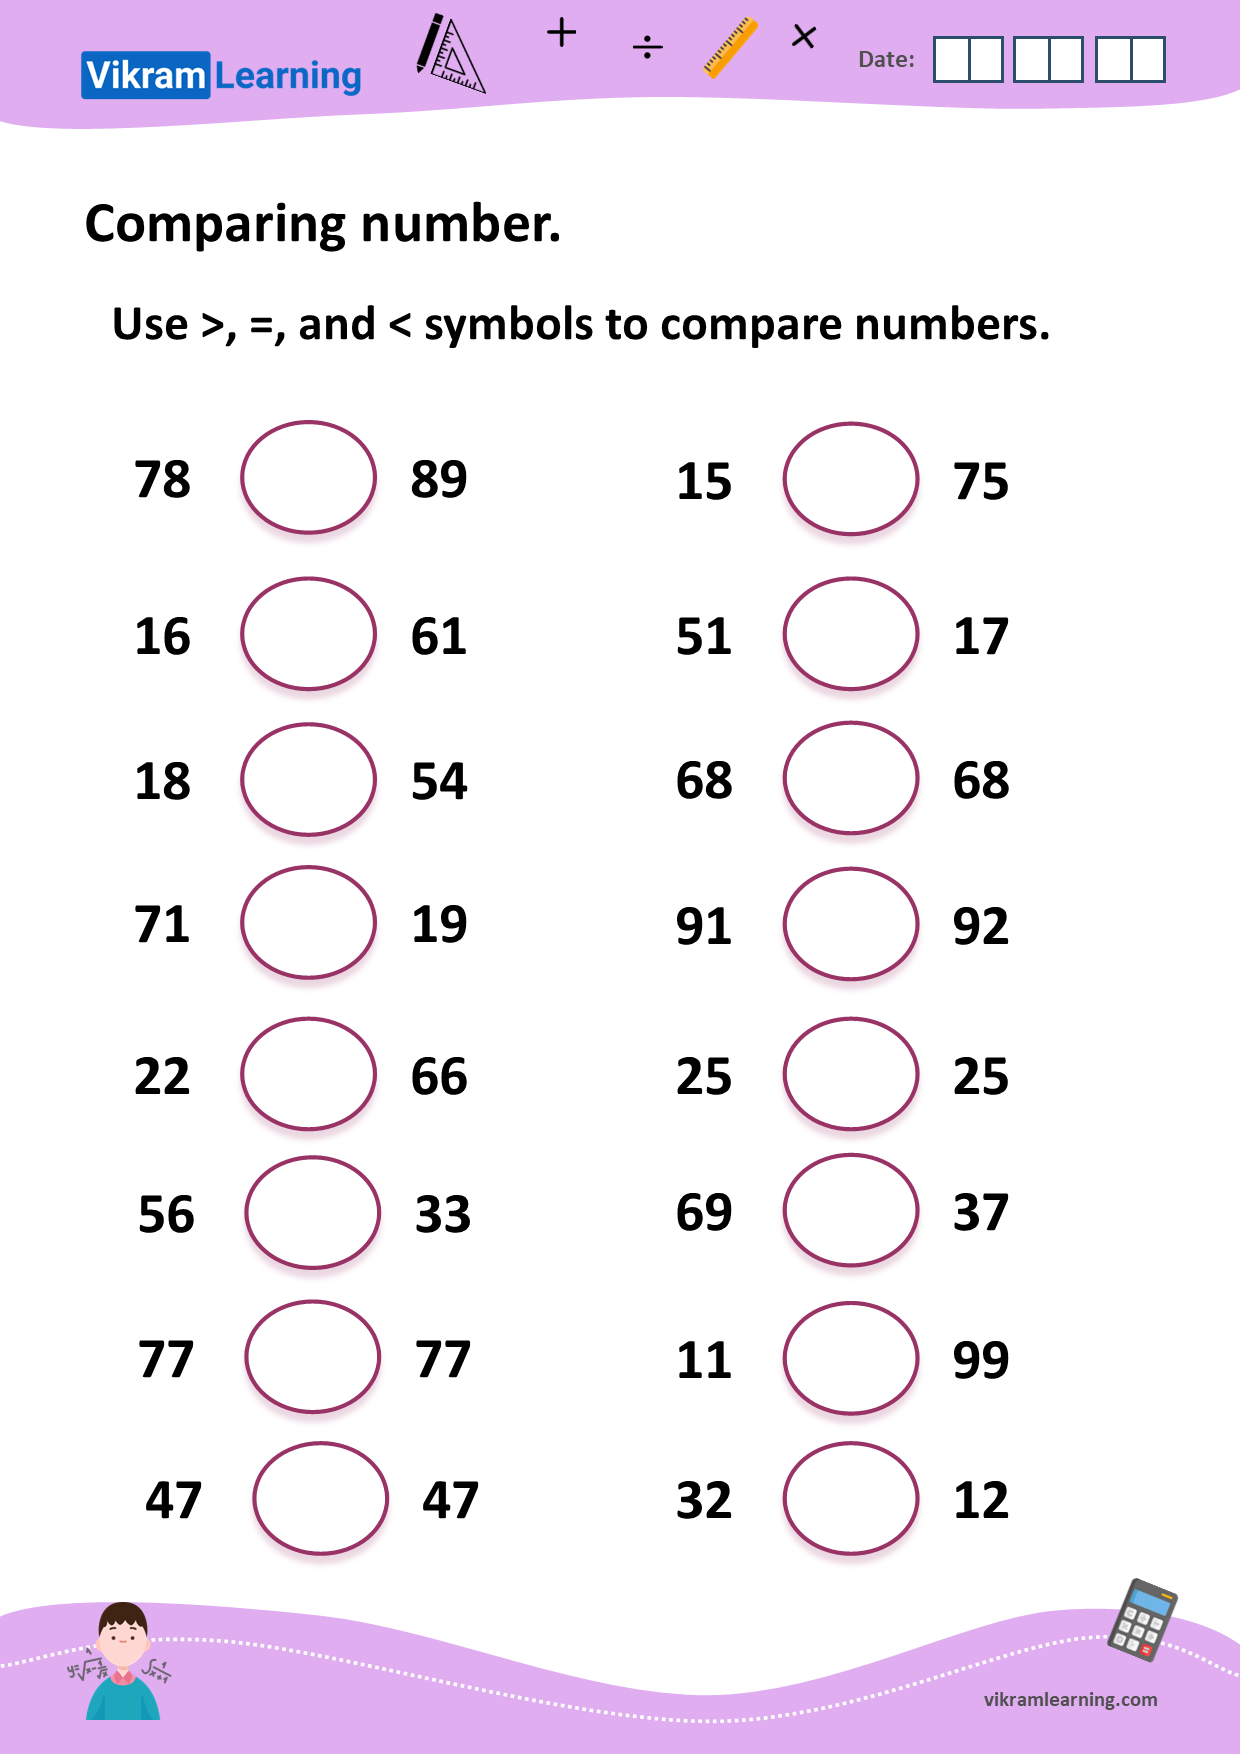 Download comparing numbers up to 100 worksheets | vikramlearning.com